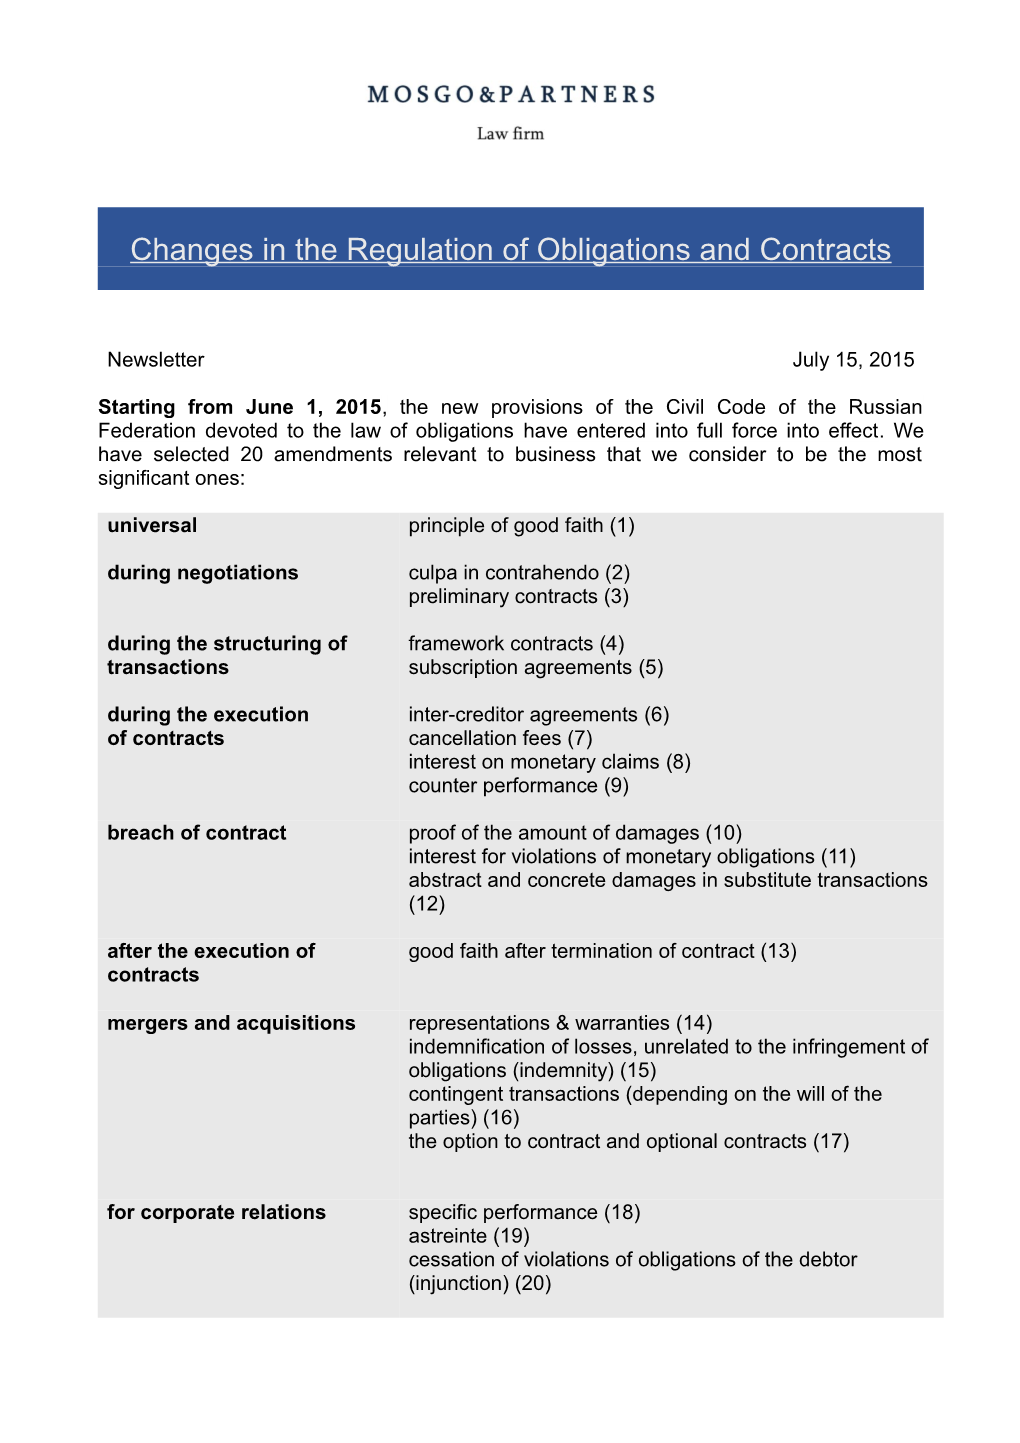 Changes in the Regulation of Obligations and Contracts